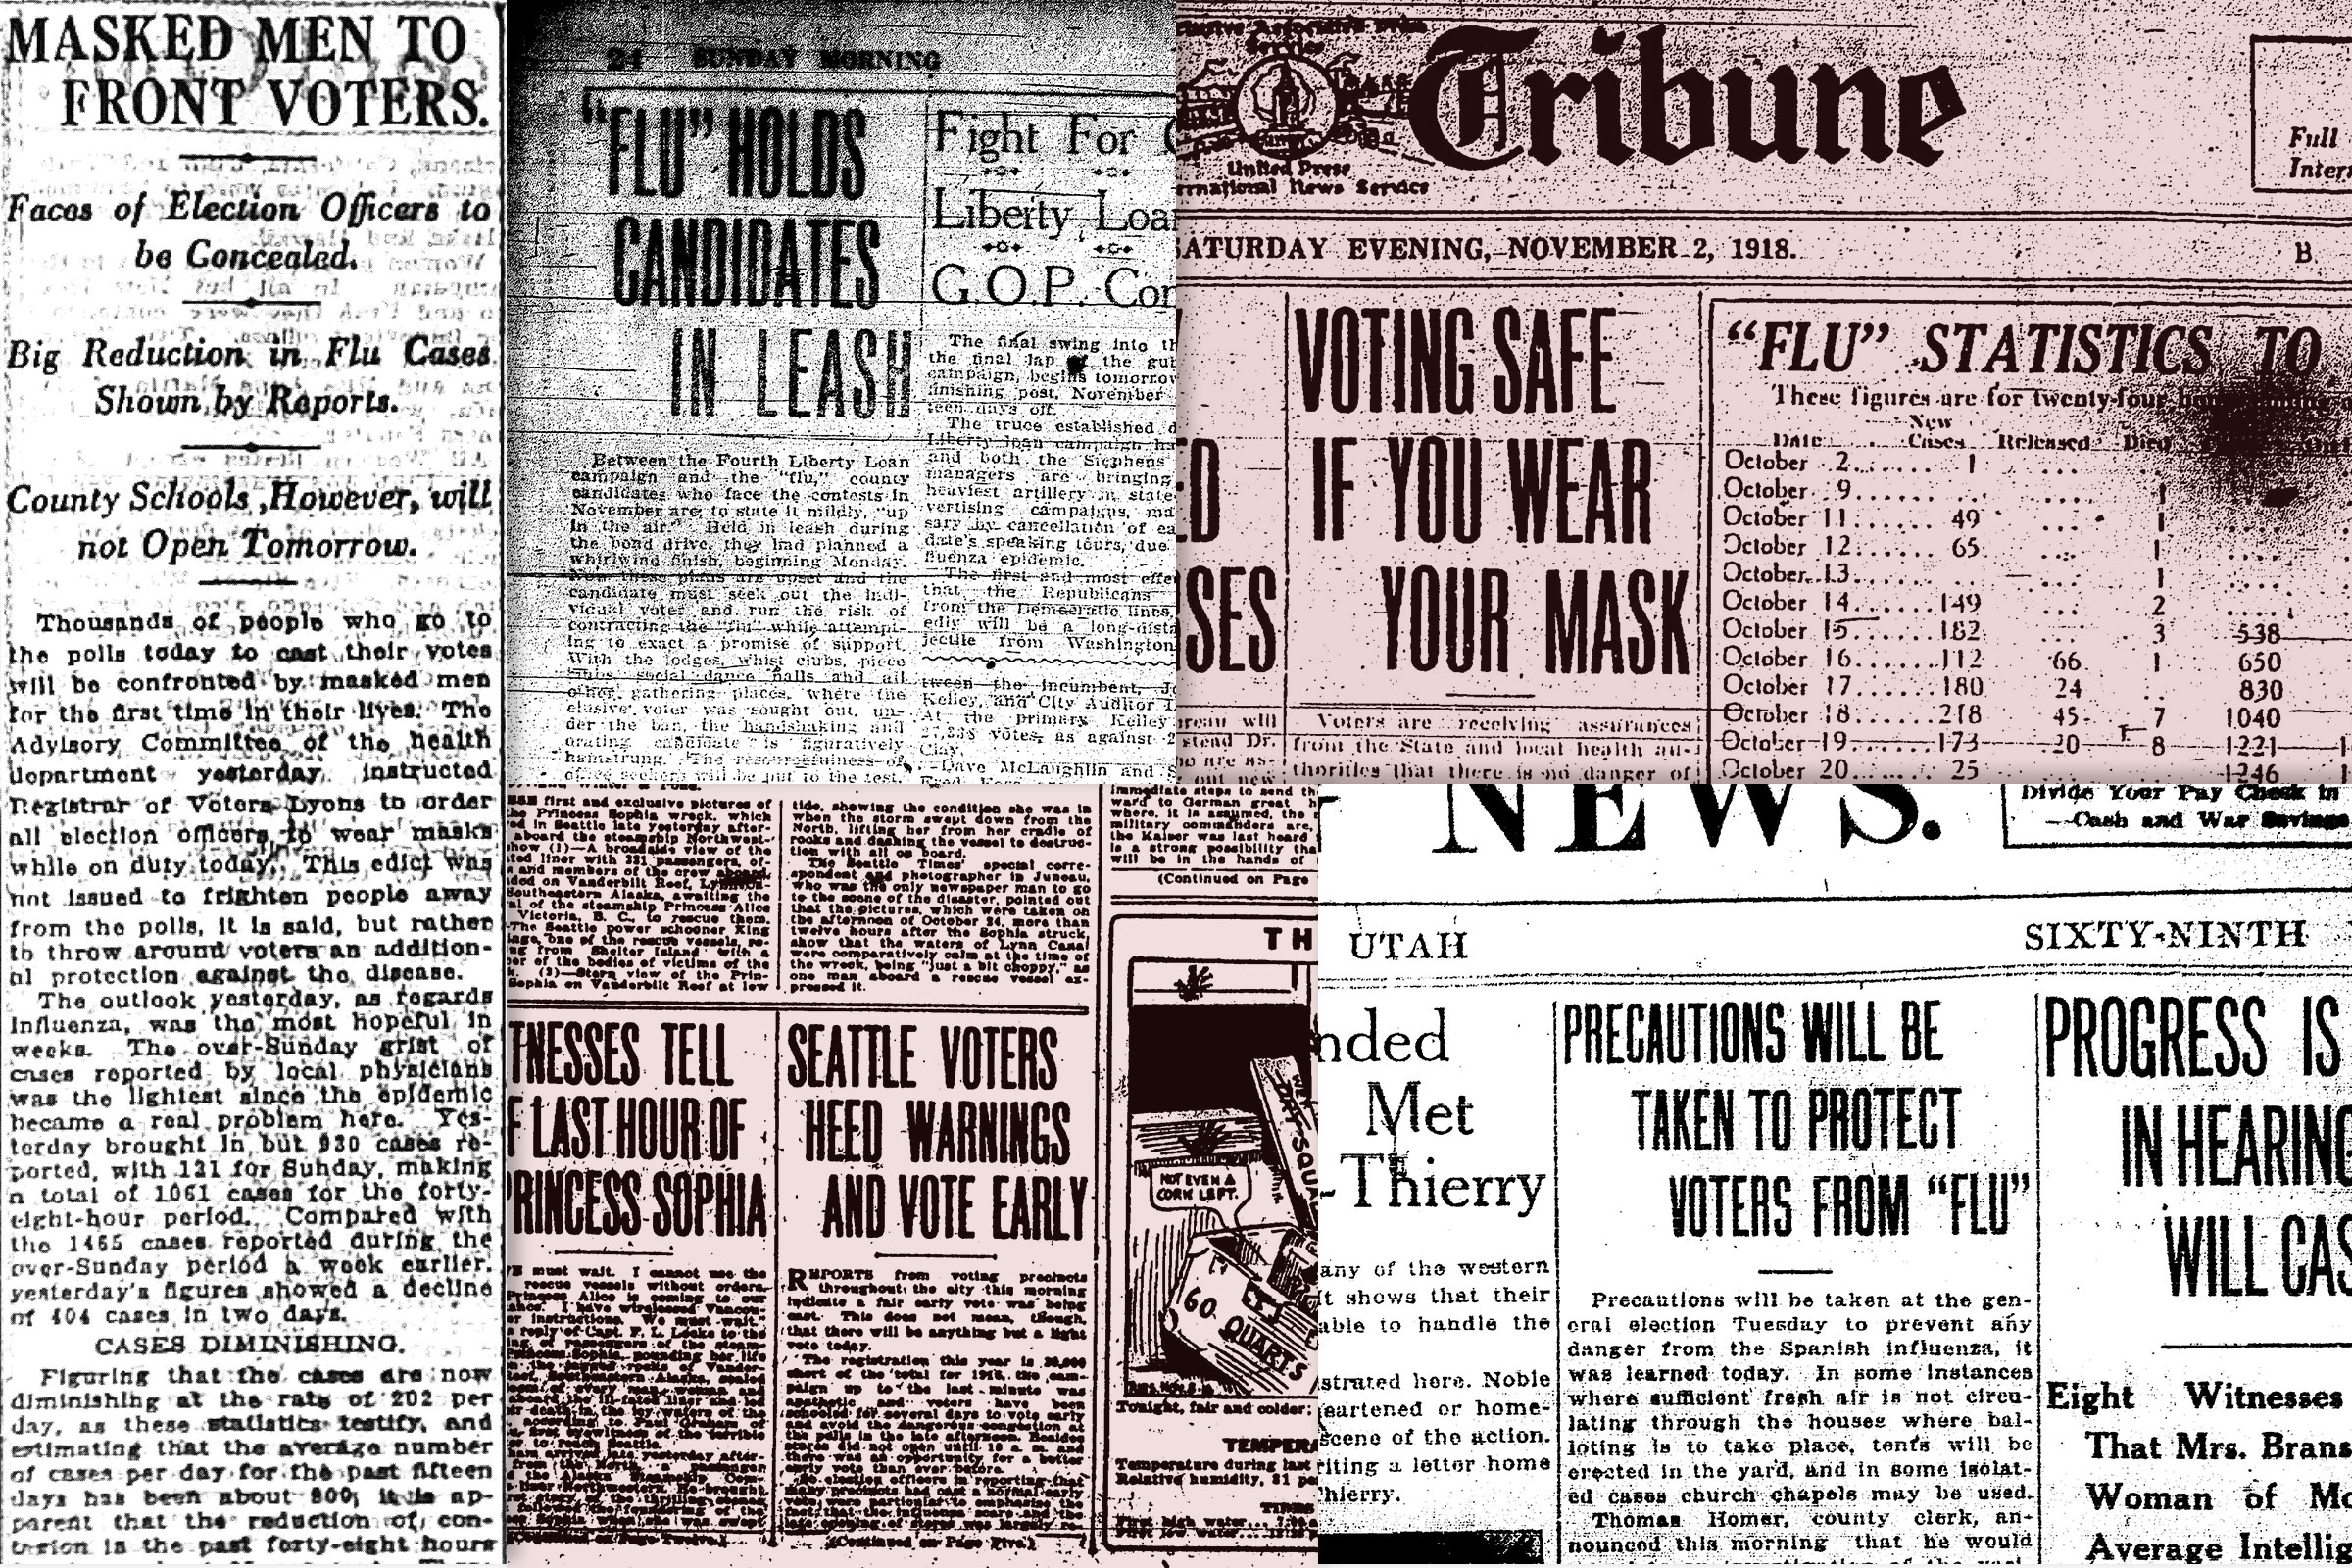 Newspaper headlines about the Flu, 1918 (Influenza Encyclopedia/University of Michigan Center for the History of Medicine and Michigan Publishing, University of Michigan Library)